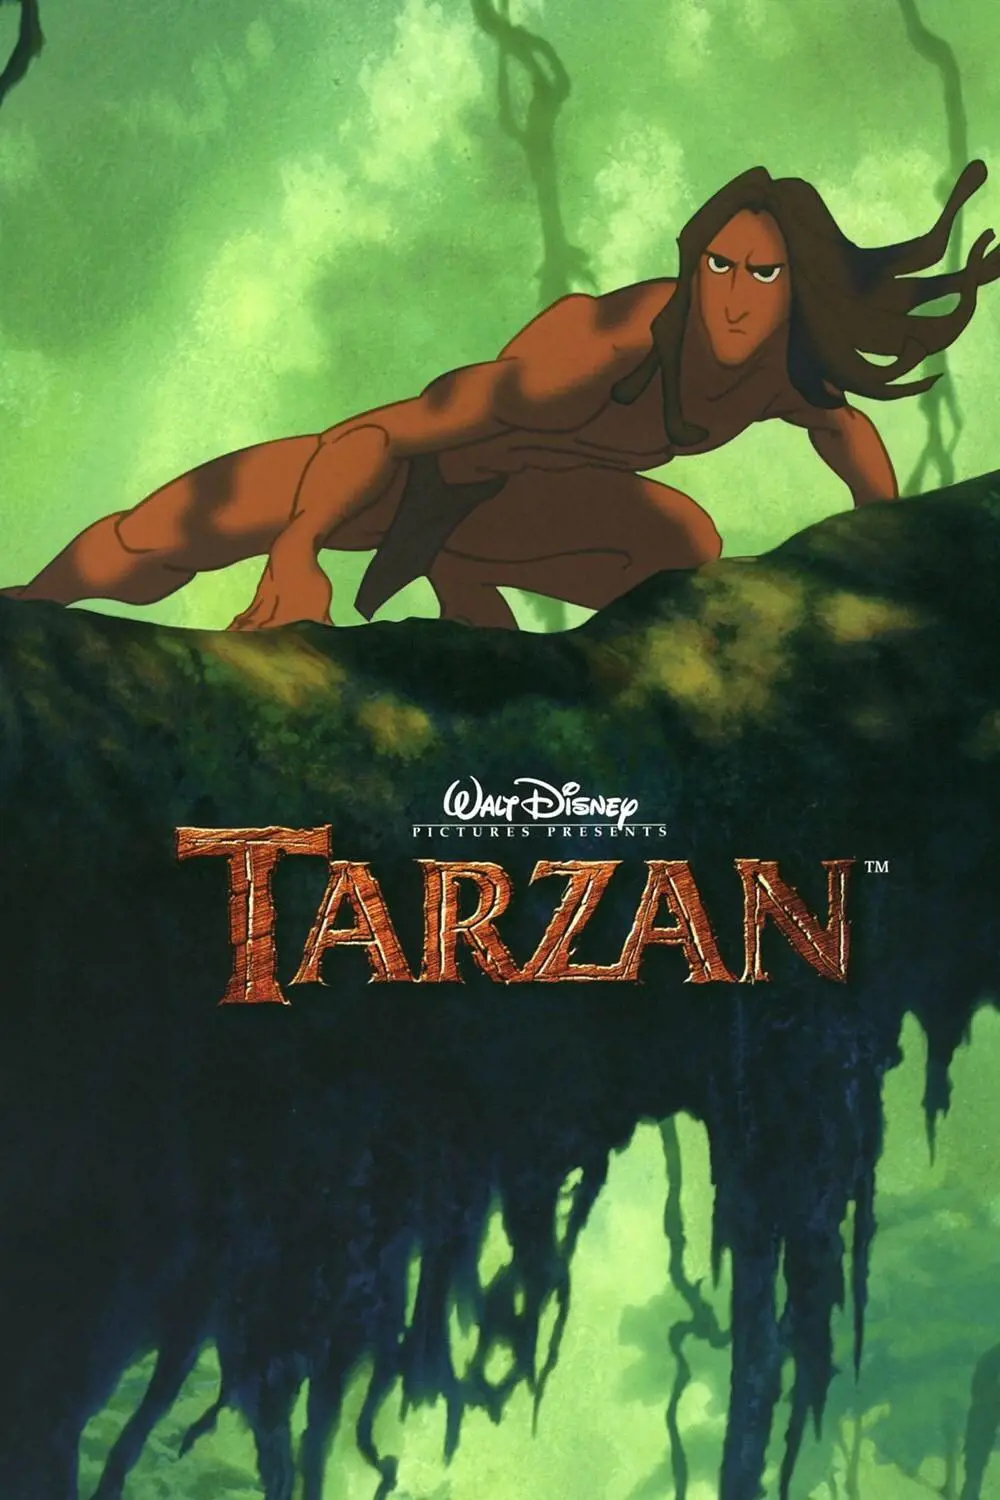 The official poster of Tarzan